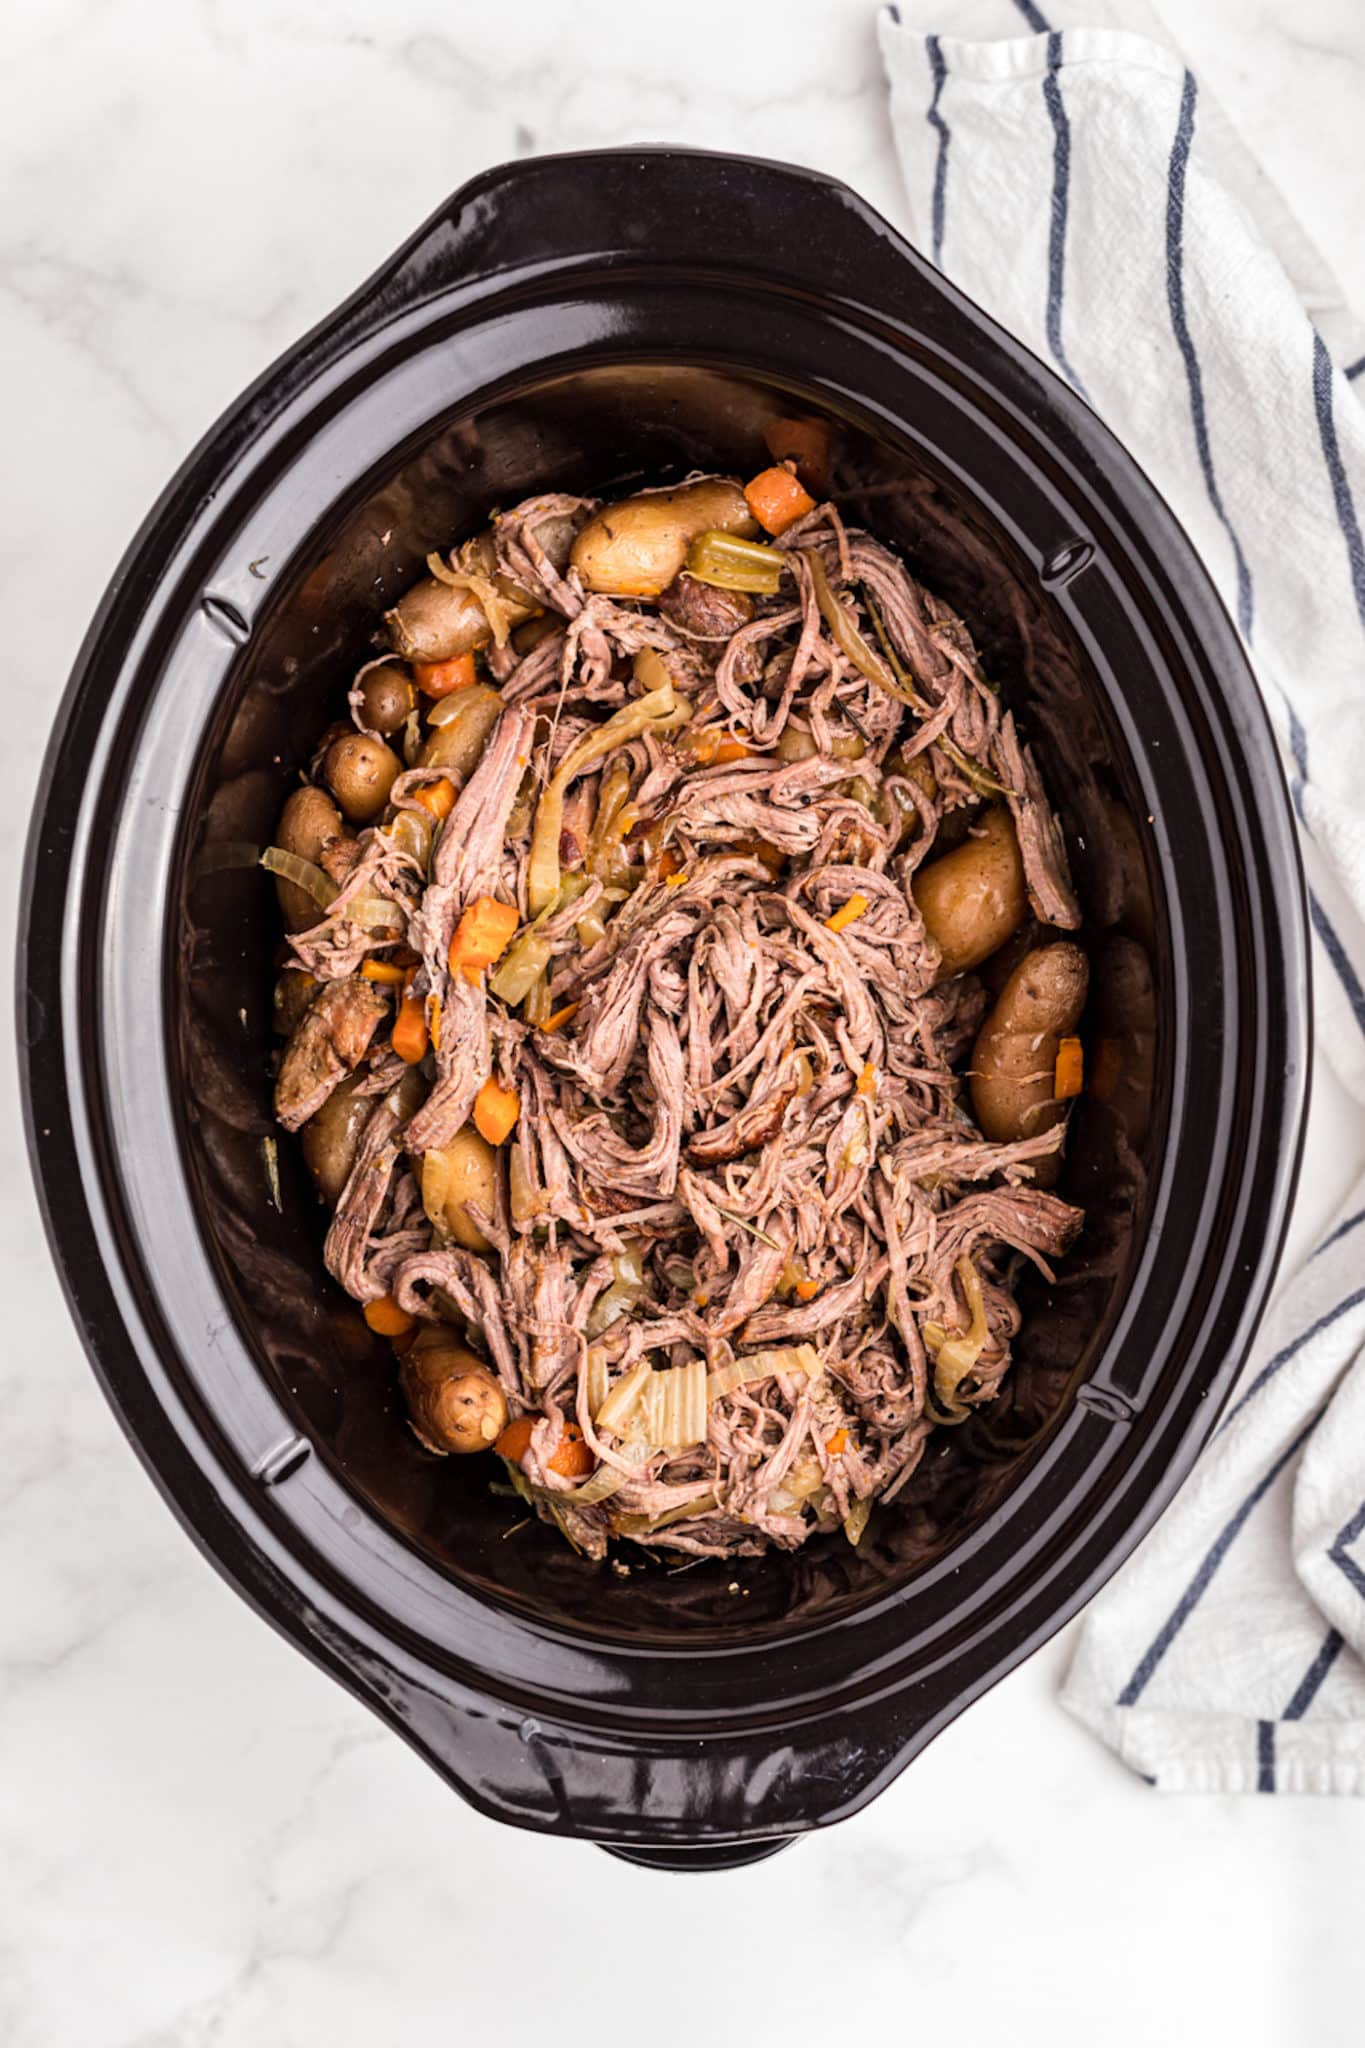 shredded tri tip with veggies in slow cooker